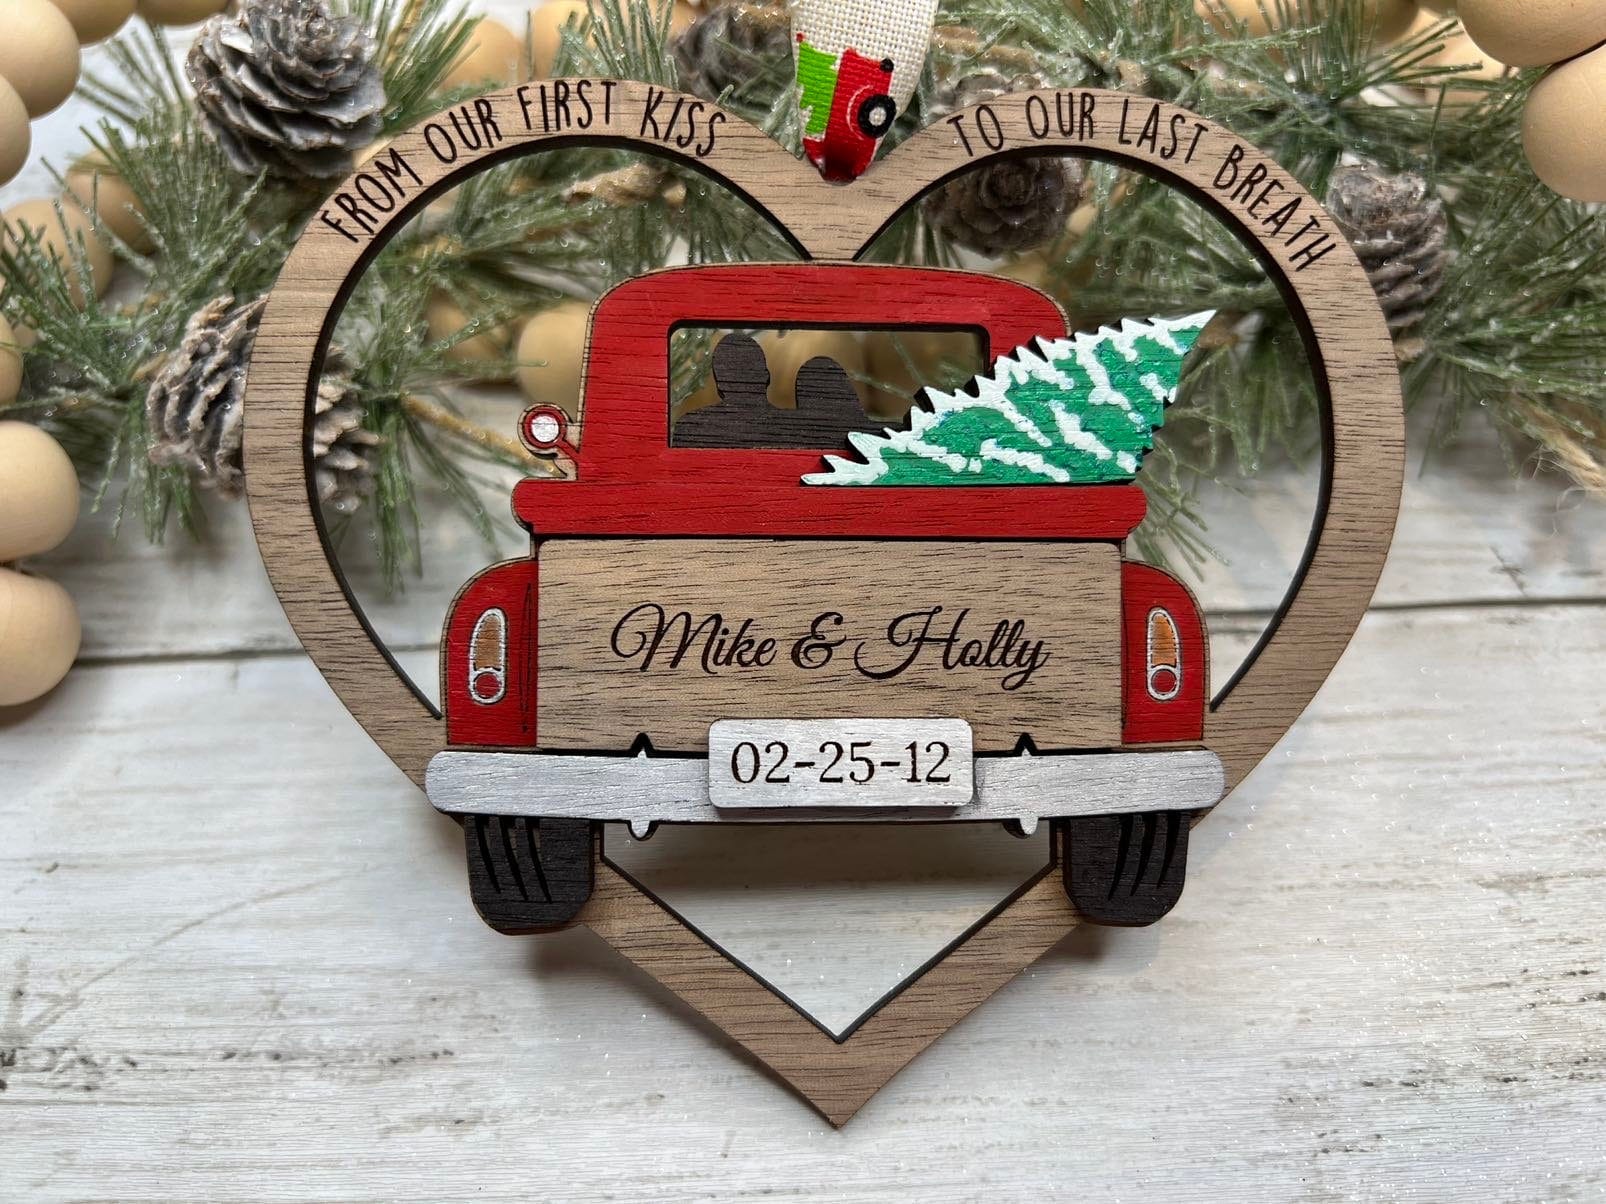 Christmas Tree Truck Ornament, SVG Laser File, From Our First Kiss to Our Last Breath, Glowforge Ready File, No Physical Product Shipped